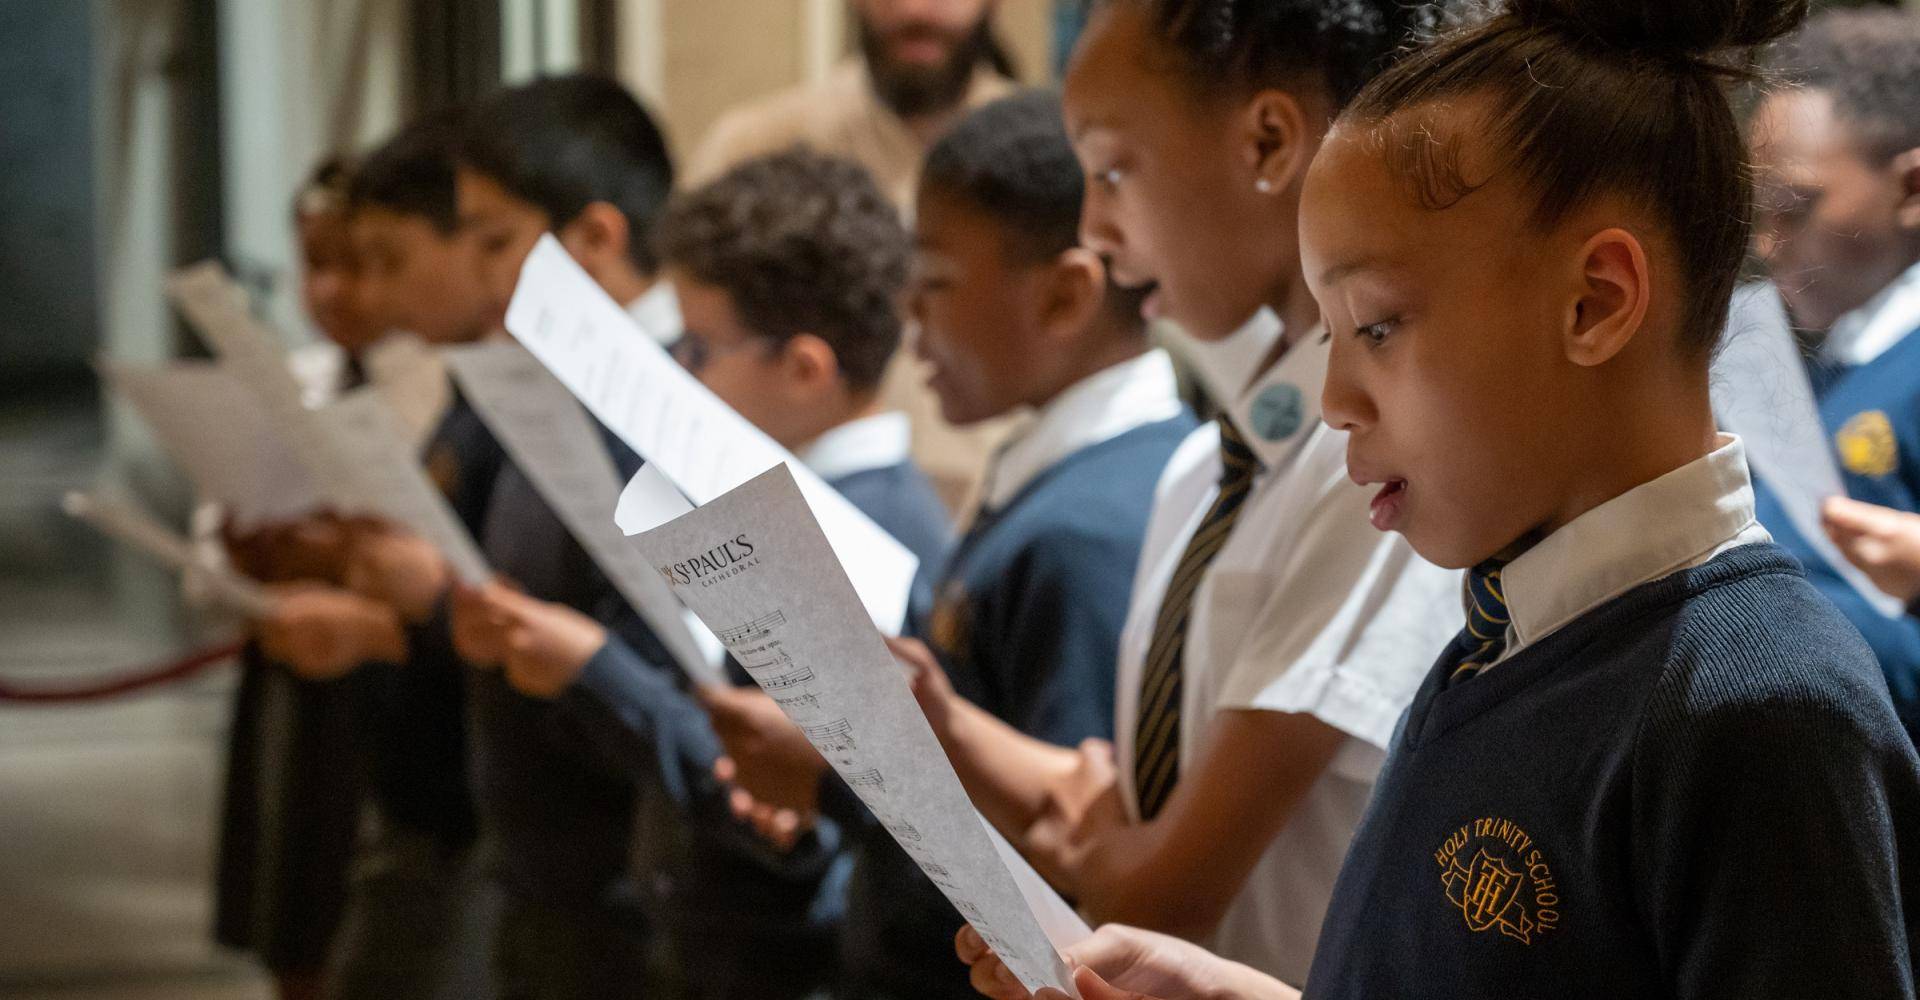 Girls and boys in school uniform sing from sheet music.